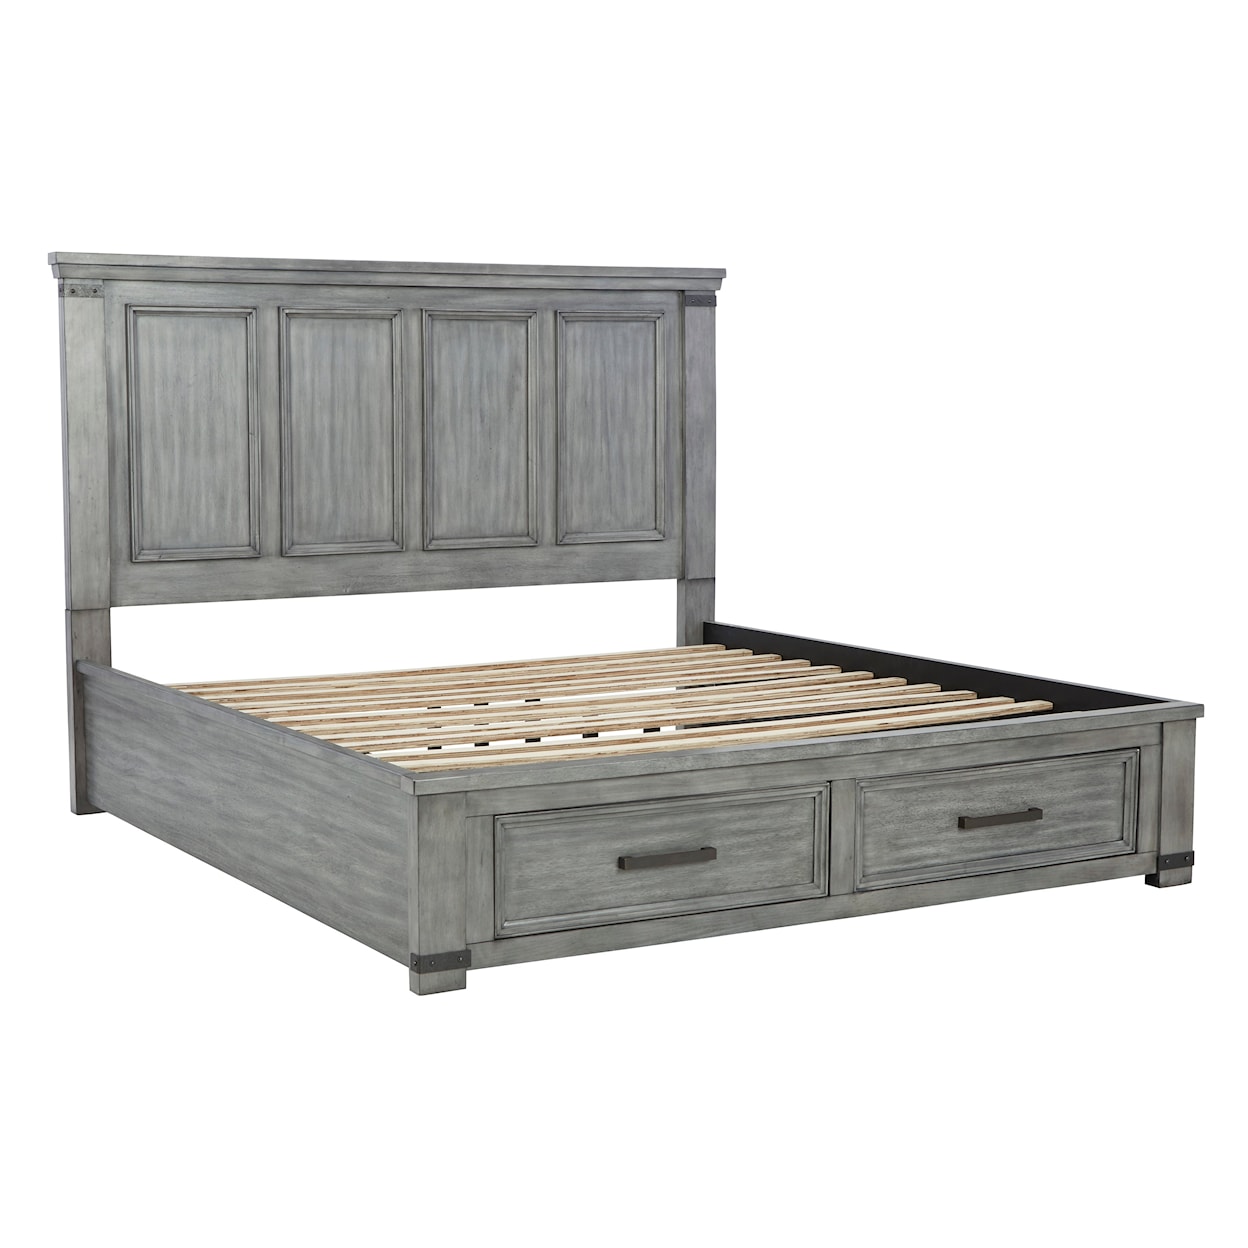 Ashley Furniture Signature Design Russelyn Queen Storage Bed